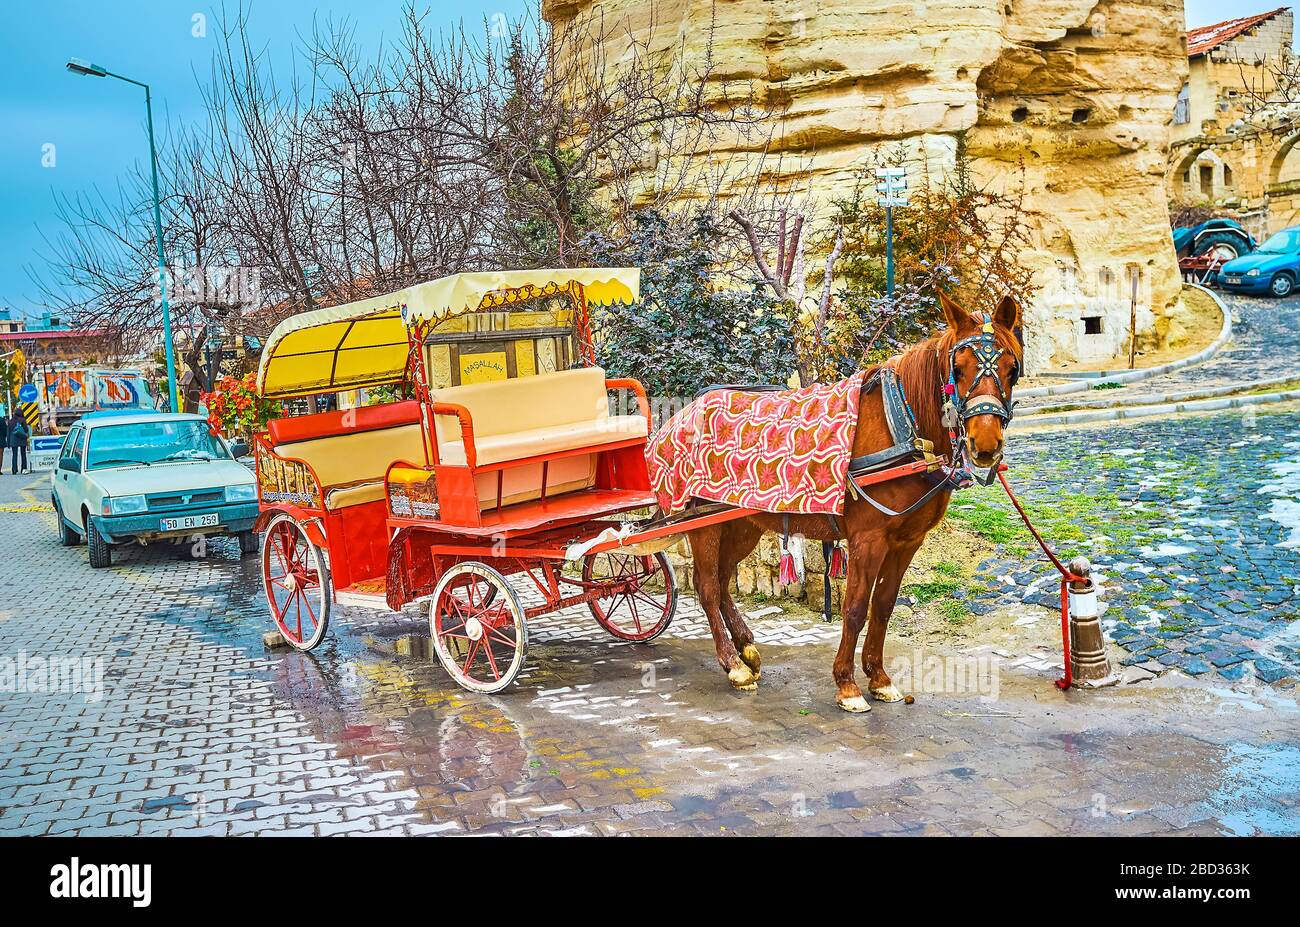 GOREME, TURKEY - JANUARY 17, 2015: The horse-drawn carriage attracts the tourists to ride around the landmarks of the town and its surroundings, on Ja Stock Photo